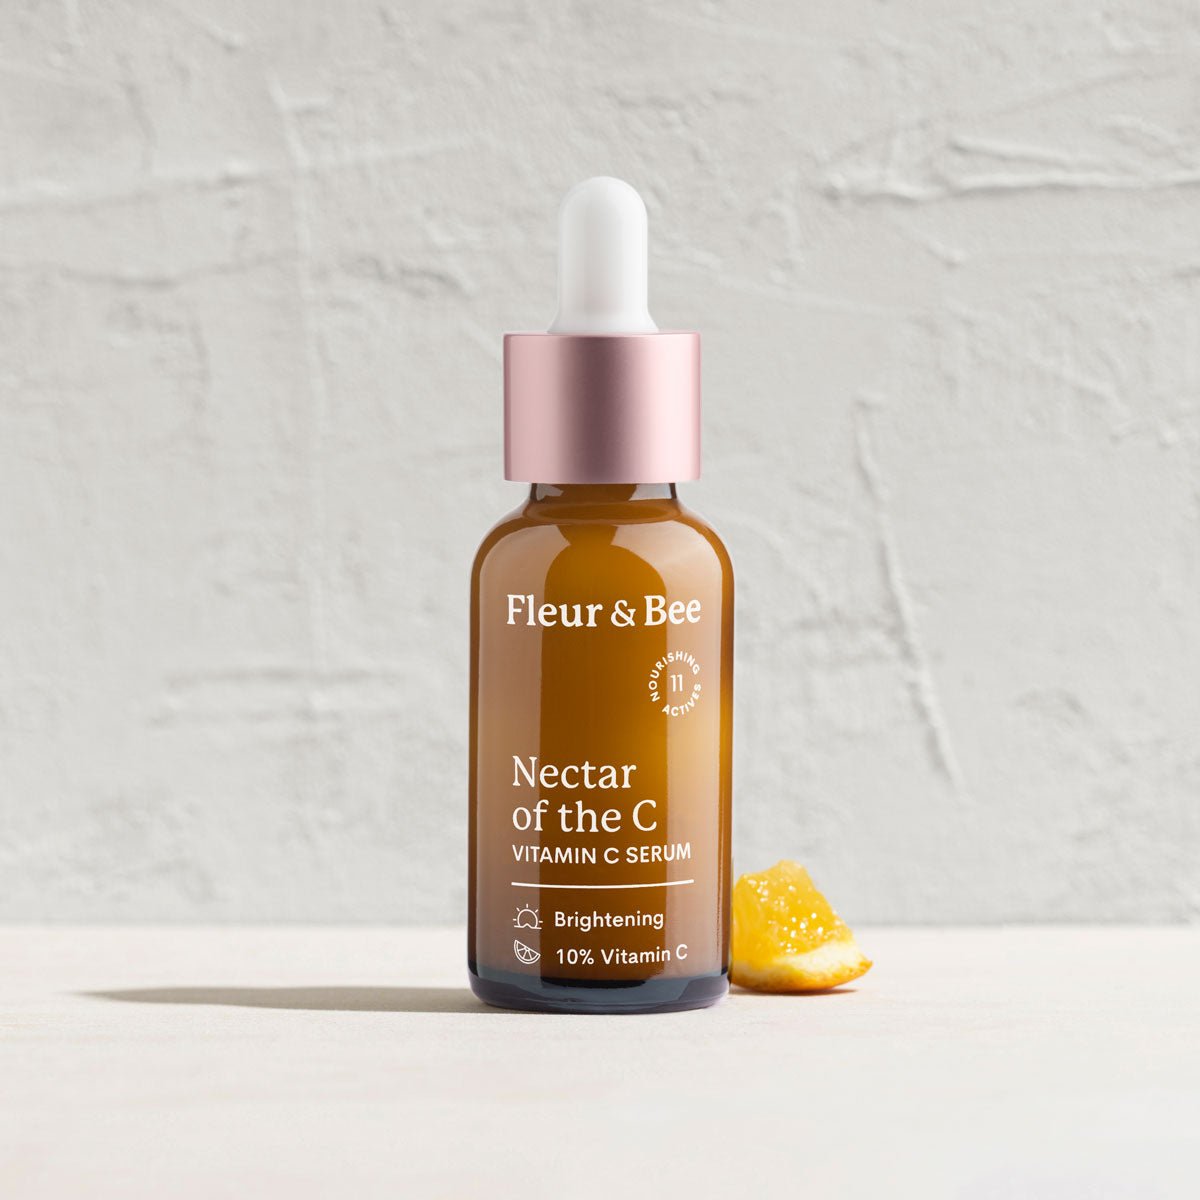 Nectar of the C, a natural Vitamin C Serum by Fleur & Bee